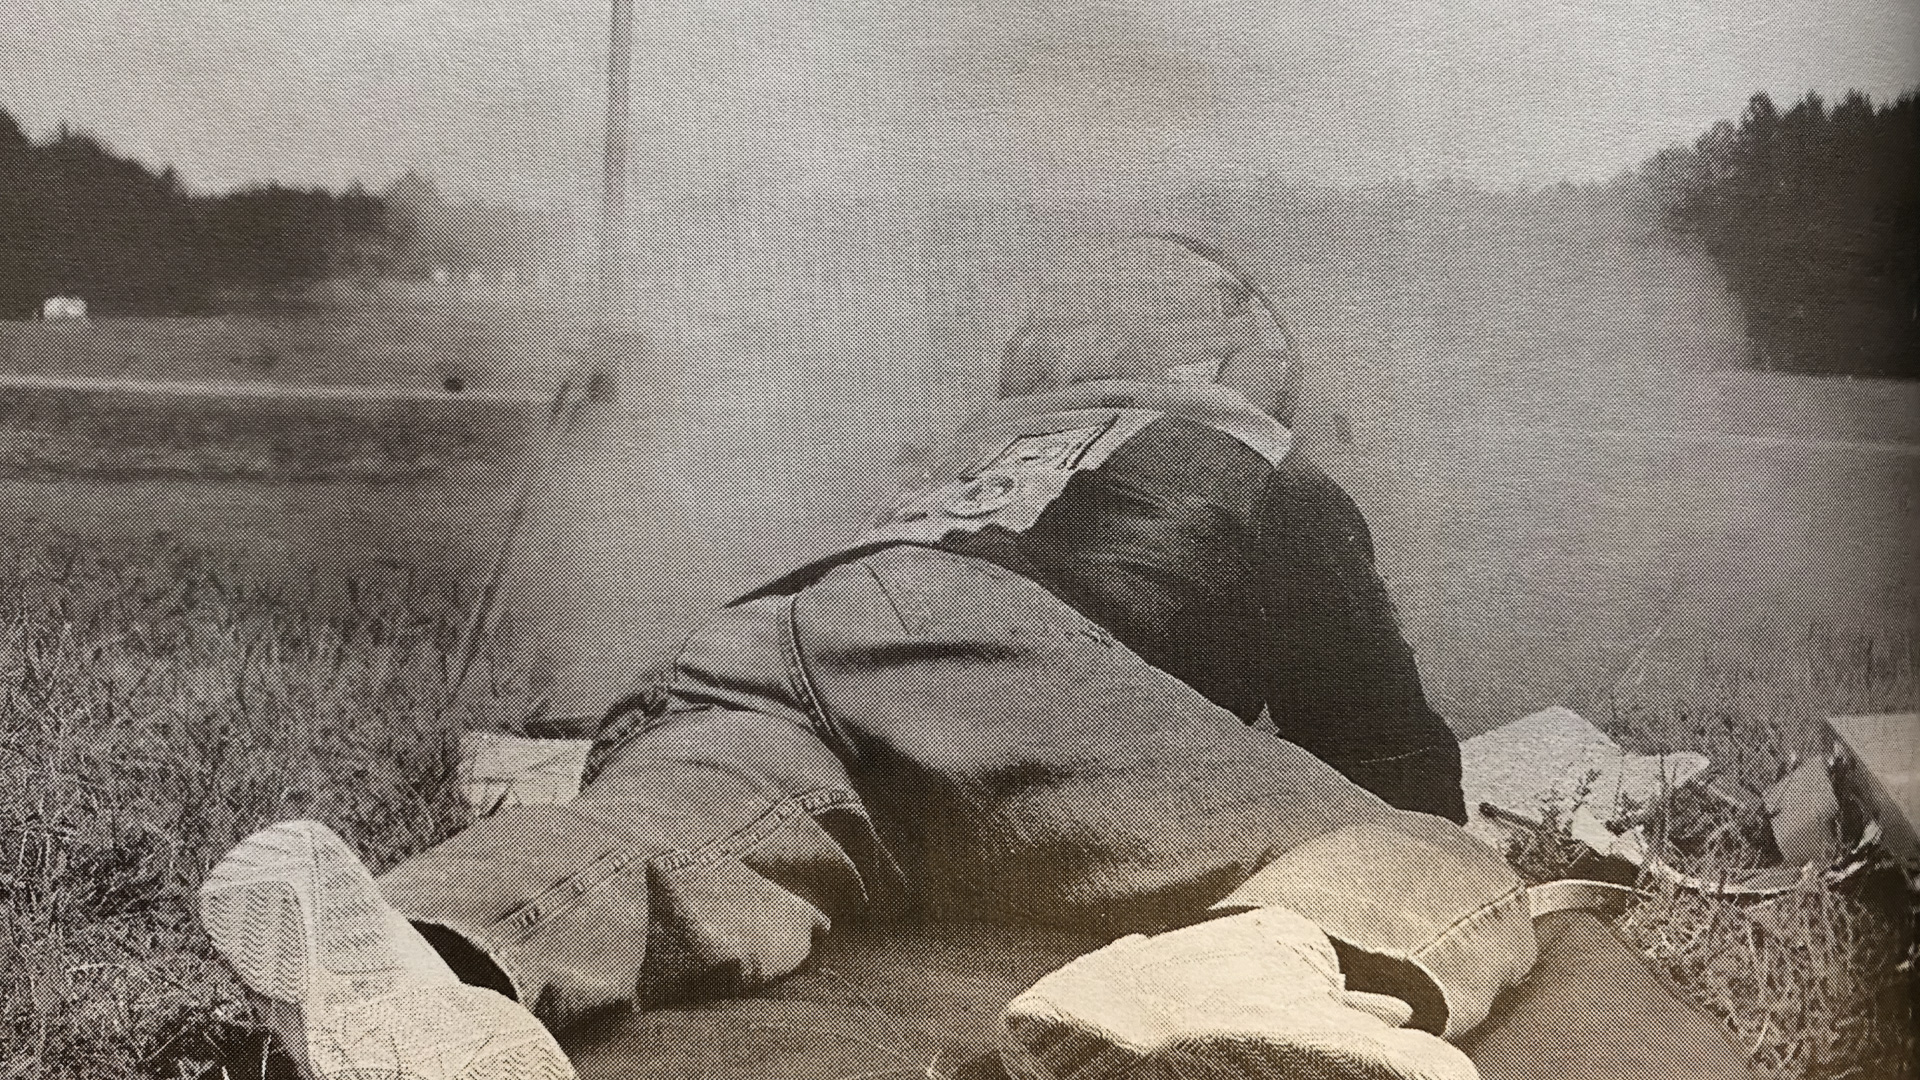 Blackpowder shooter in prone position